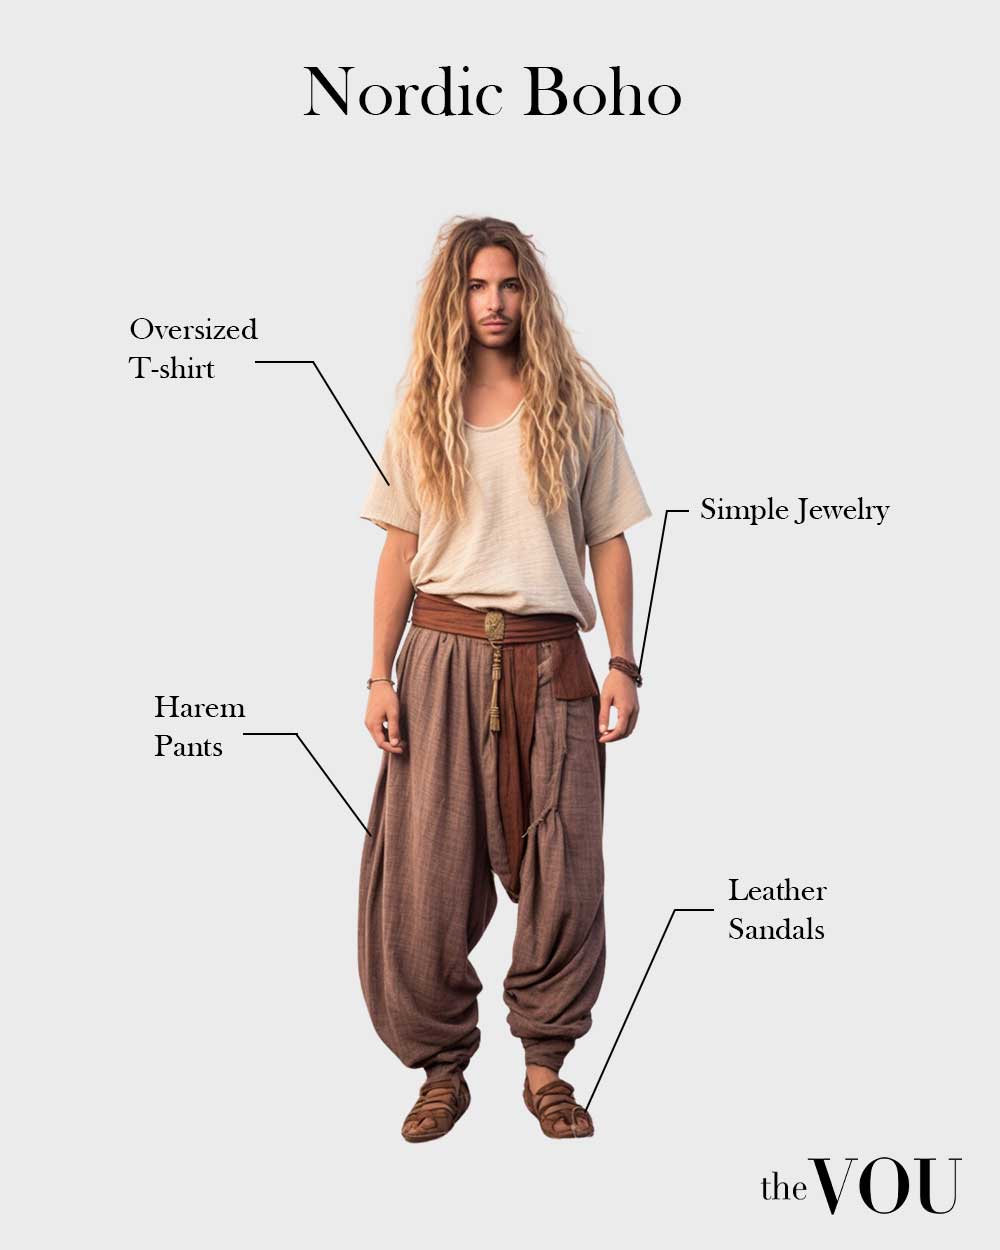 Nordic boho outfit for men